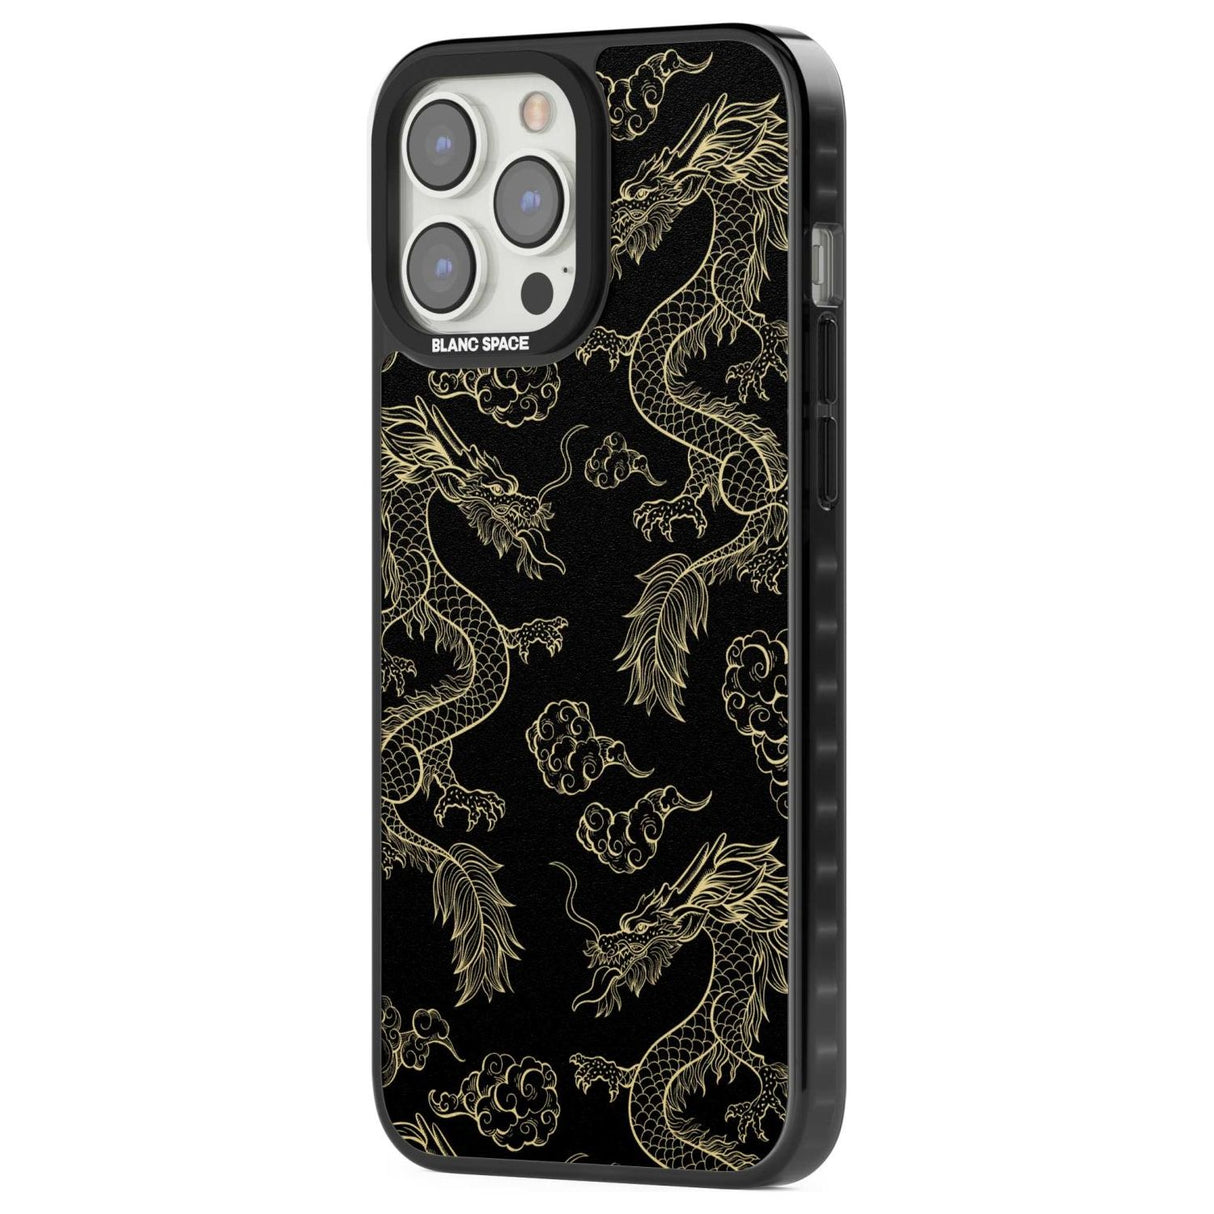 Black and Gold Dragon Pattern Phone Case iPhone 15 Pro Max / Black Impact Case,iPhone 15 Plus / Black Impact Case,iPhone 15 Pro / Black Impact Case,iPhone 15 / Black Impact Case,iPhone 15 Pro Max / Impact Case,iPhone 15 Plus / Impact Case,iPhone 15 Pro / Impact Case,iPhone 15 / Impact Case,iPhone 15 Pro Max / Magsafe Black Impact Case,iPhone 15 Plus / Magsafe Black Impact Case,iPhone 15 Pro / Magsafe Black Impact Case,iPhone 15 / Magsafe Black Impact Case,iPhone 14 Pro Max / Black Impact Case,iPhone 14 Plus